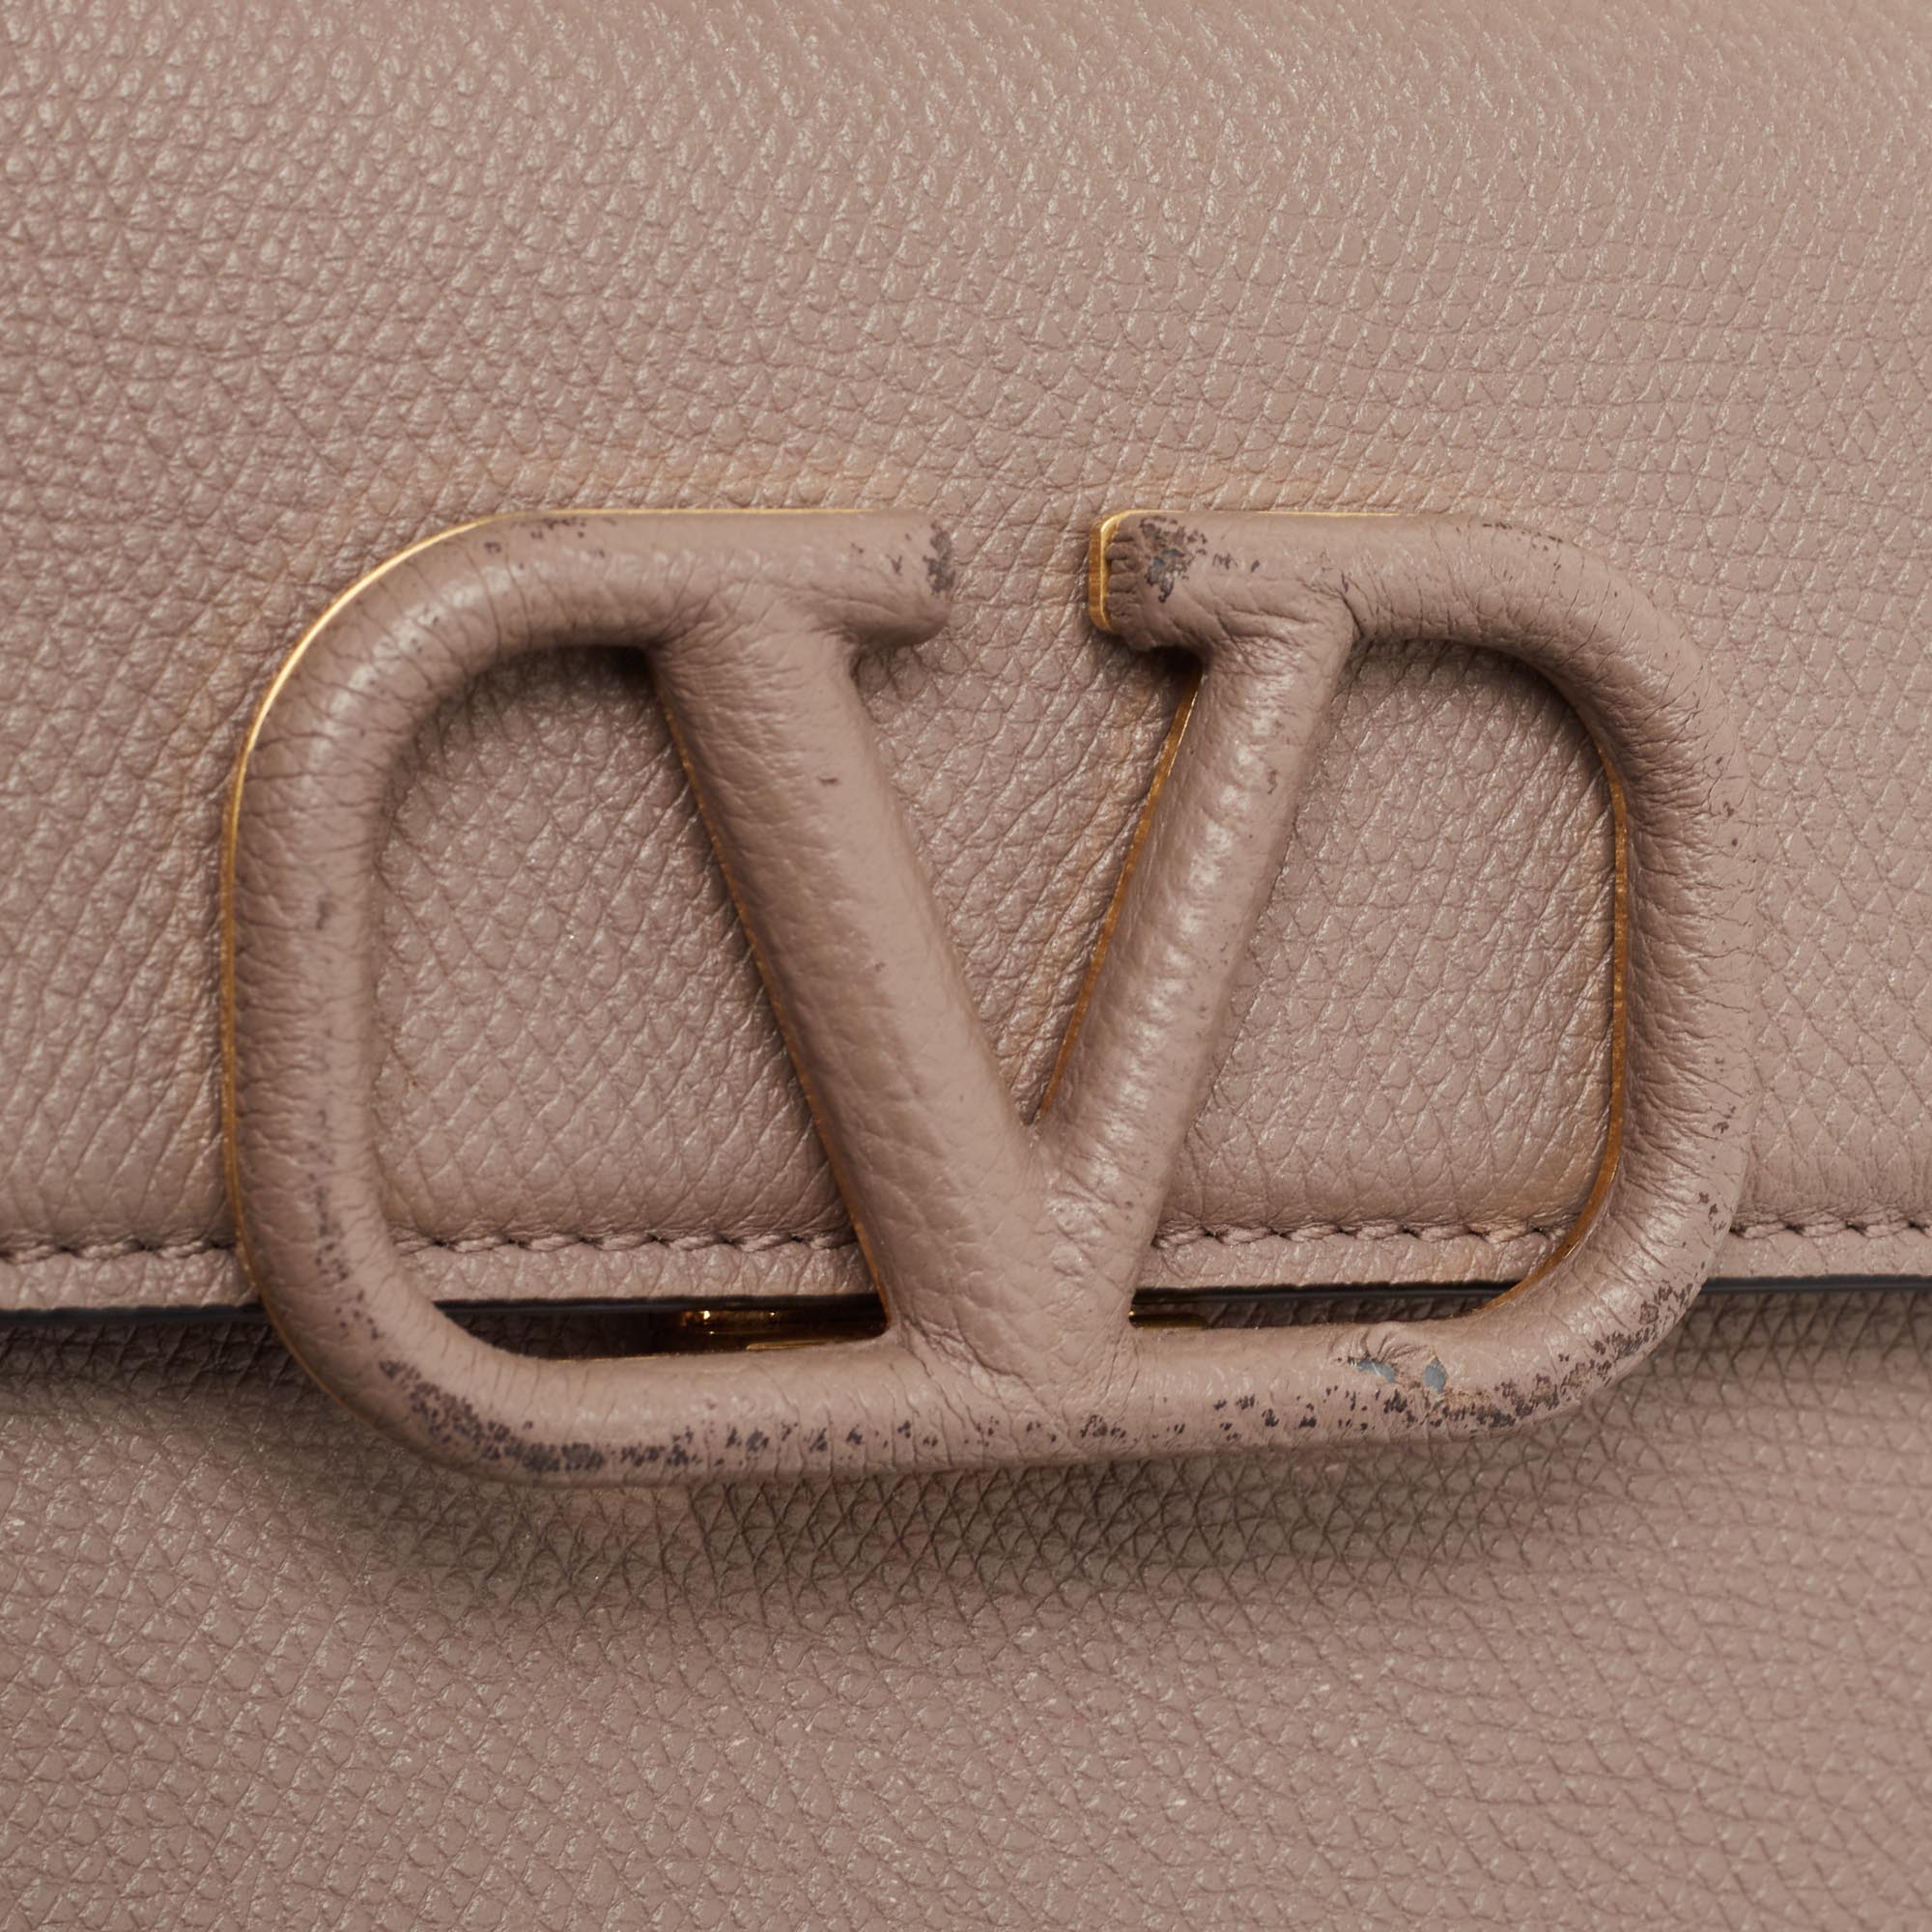 Valentino Beige Leather Small VSling Top Handle Bag